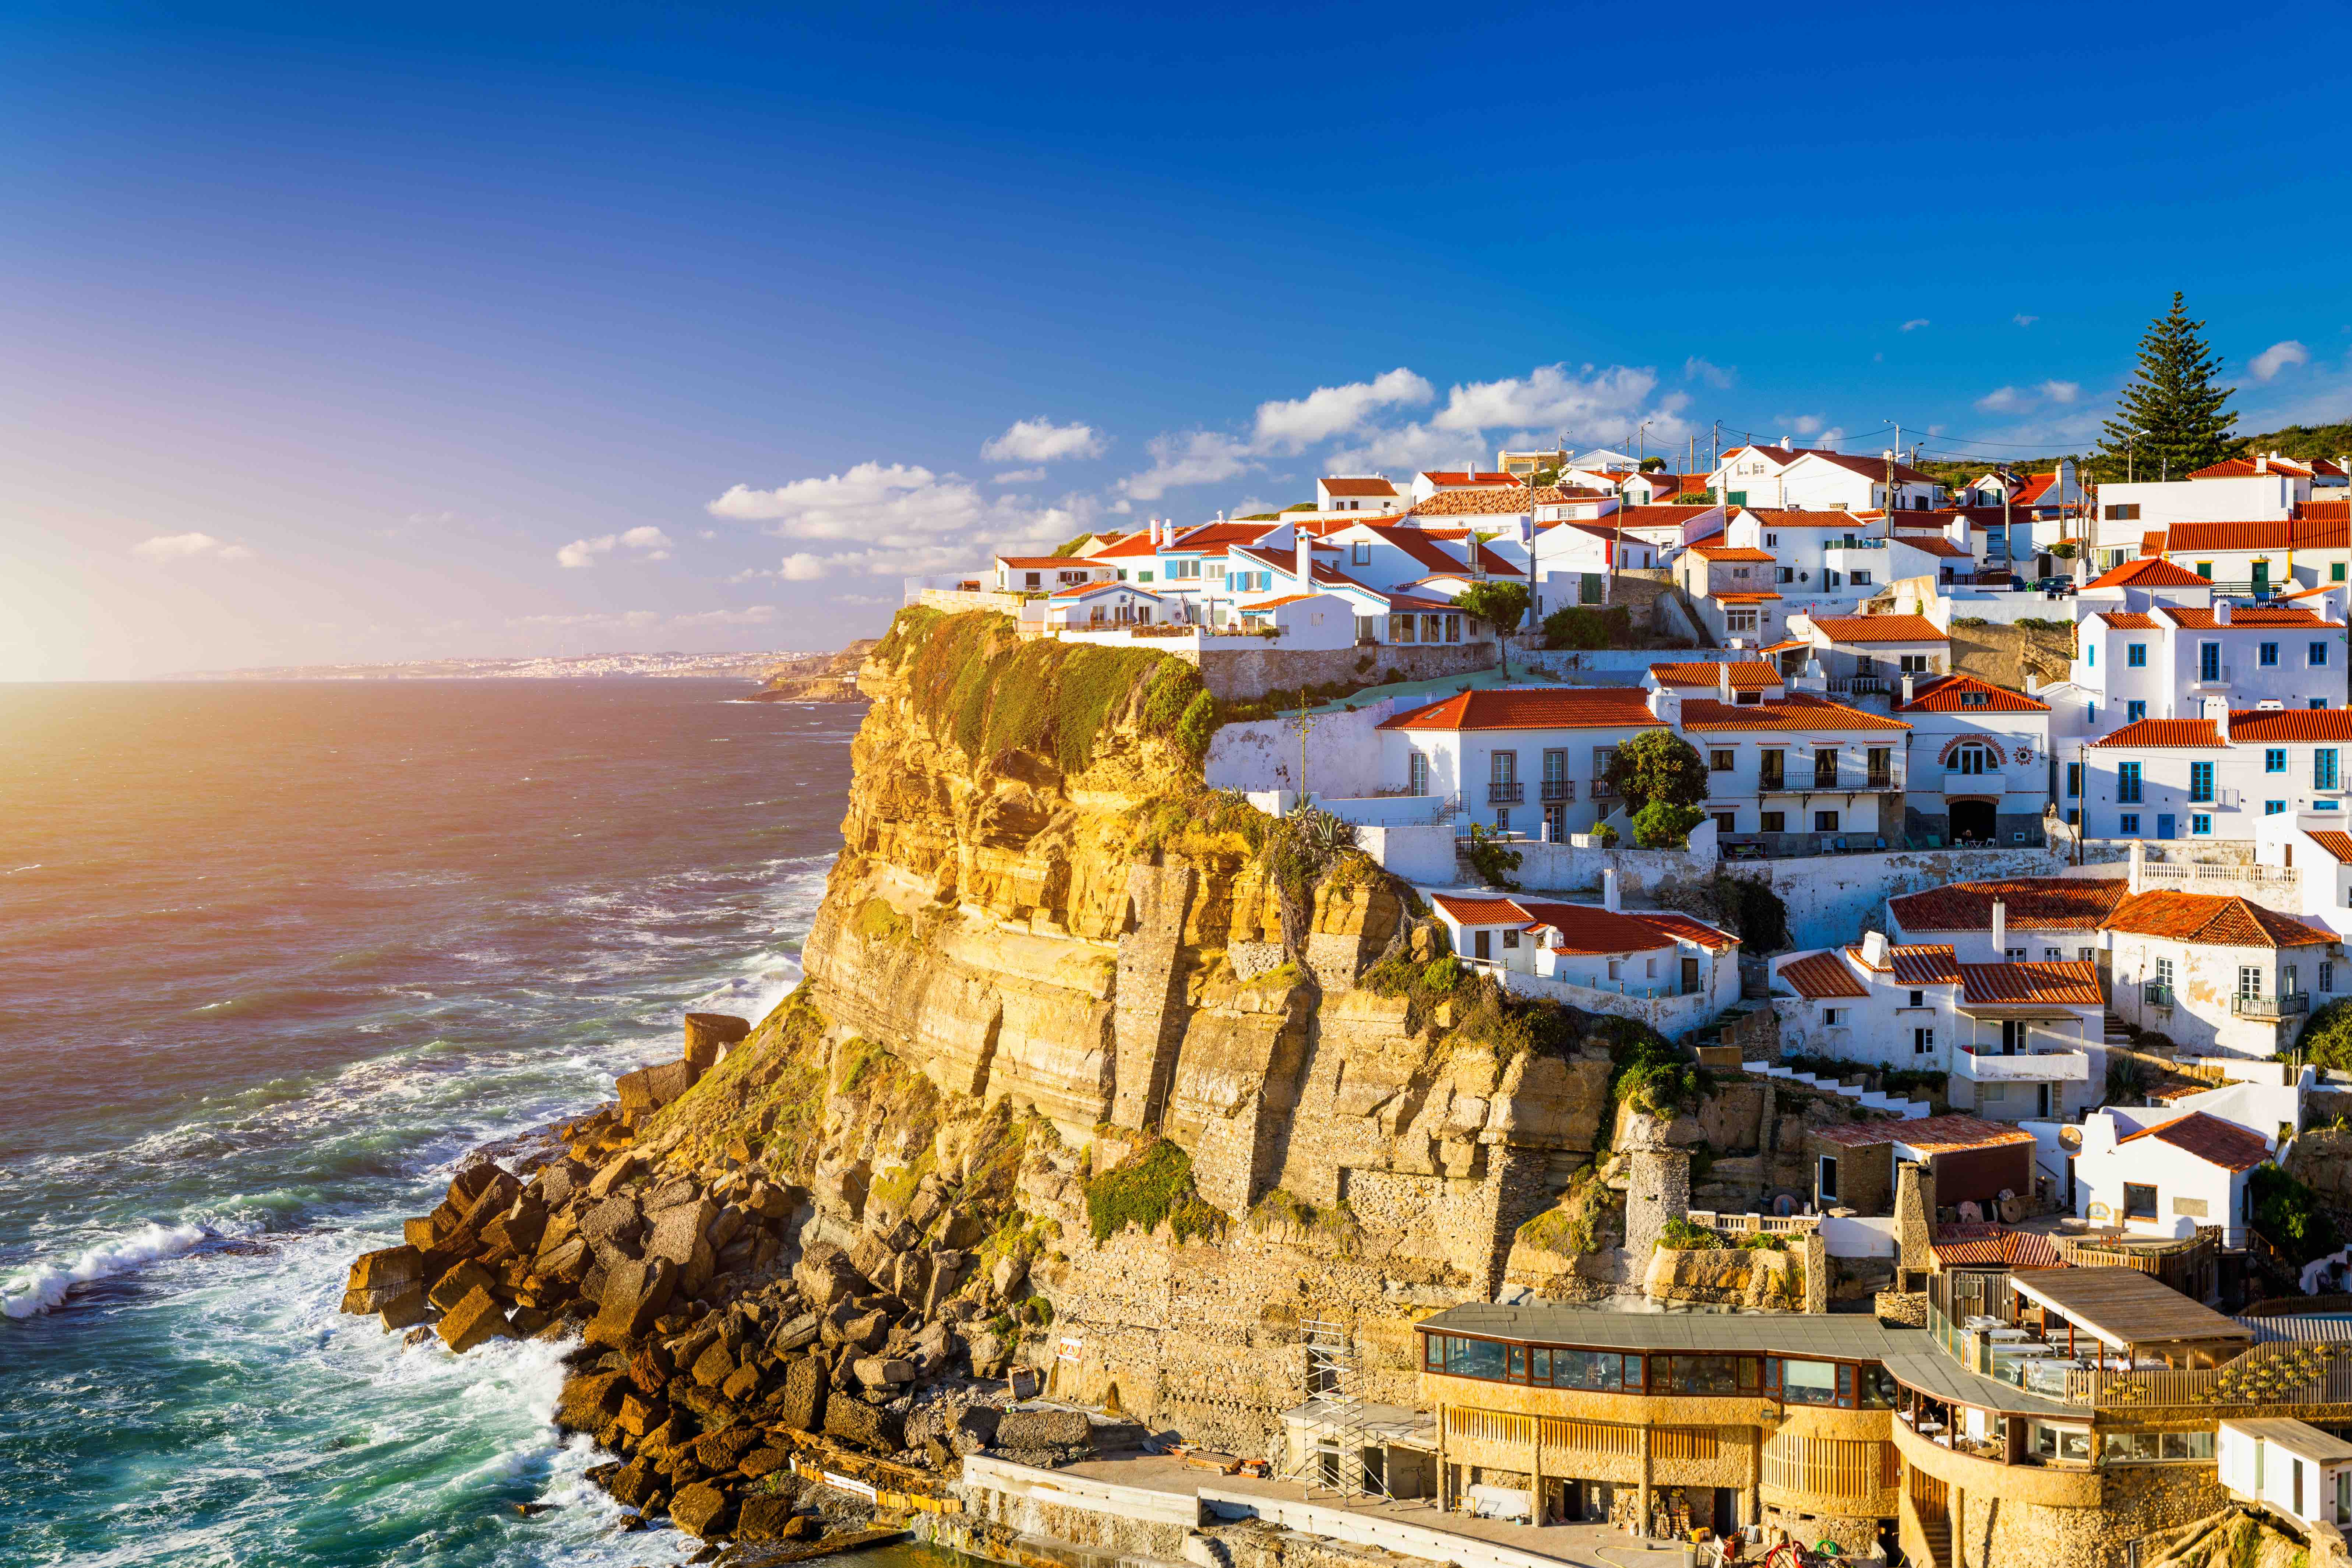 80 Portugal Facts That Are Too Beautiful To Miss - Facts.net